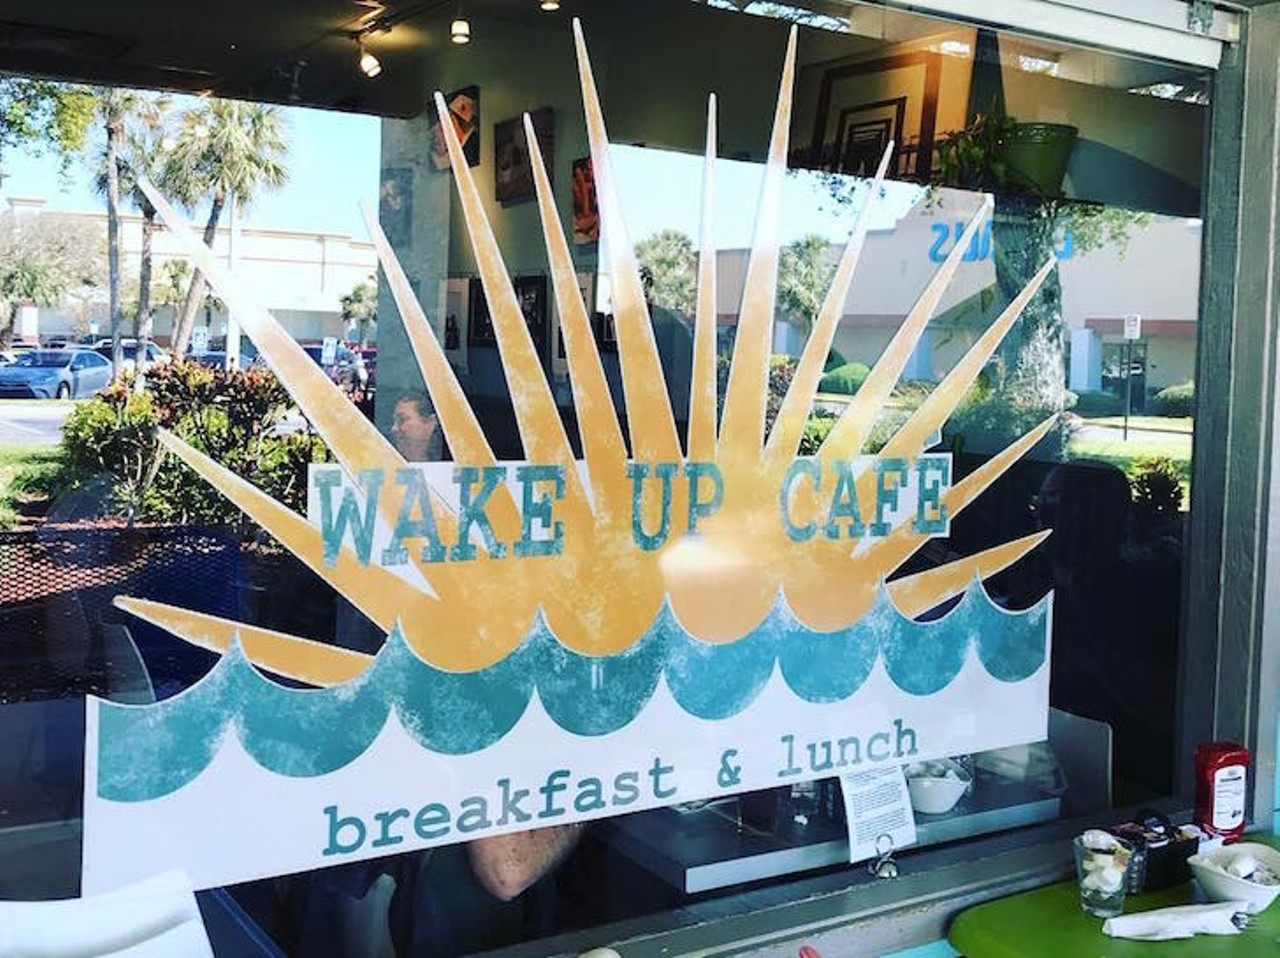 Wake Up Caf&eacute; 
749 E 3rd Ave, New Smyrna Beach, FL 32169
(386) 417-4719
Before you spend the afternoon soaking up the sun, stop by family-owned and operated Wake Up Caf&eacute; for a variety of breakfast and lunch options. The menu is sprinkled with authentic Spanish and Argentinian specialties among traditional American dishes. There&#146;s a second Wake Up Caf&eacute; North location at 306 Causeway Drive.
Photo via smyrnabeachgirl/Instagram